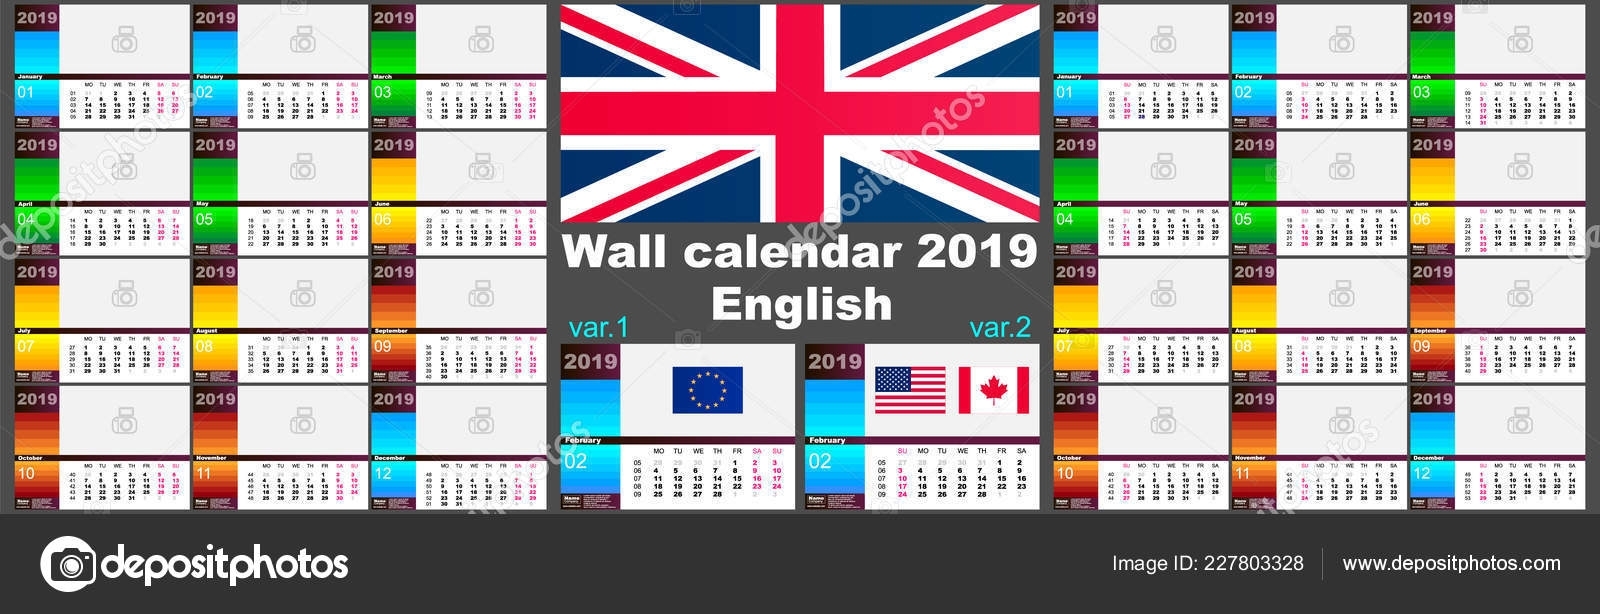 2019 English Wall Calendar. Two Iso 8601 Templates For